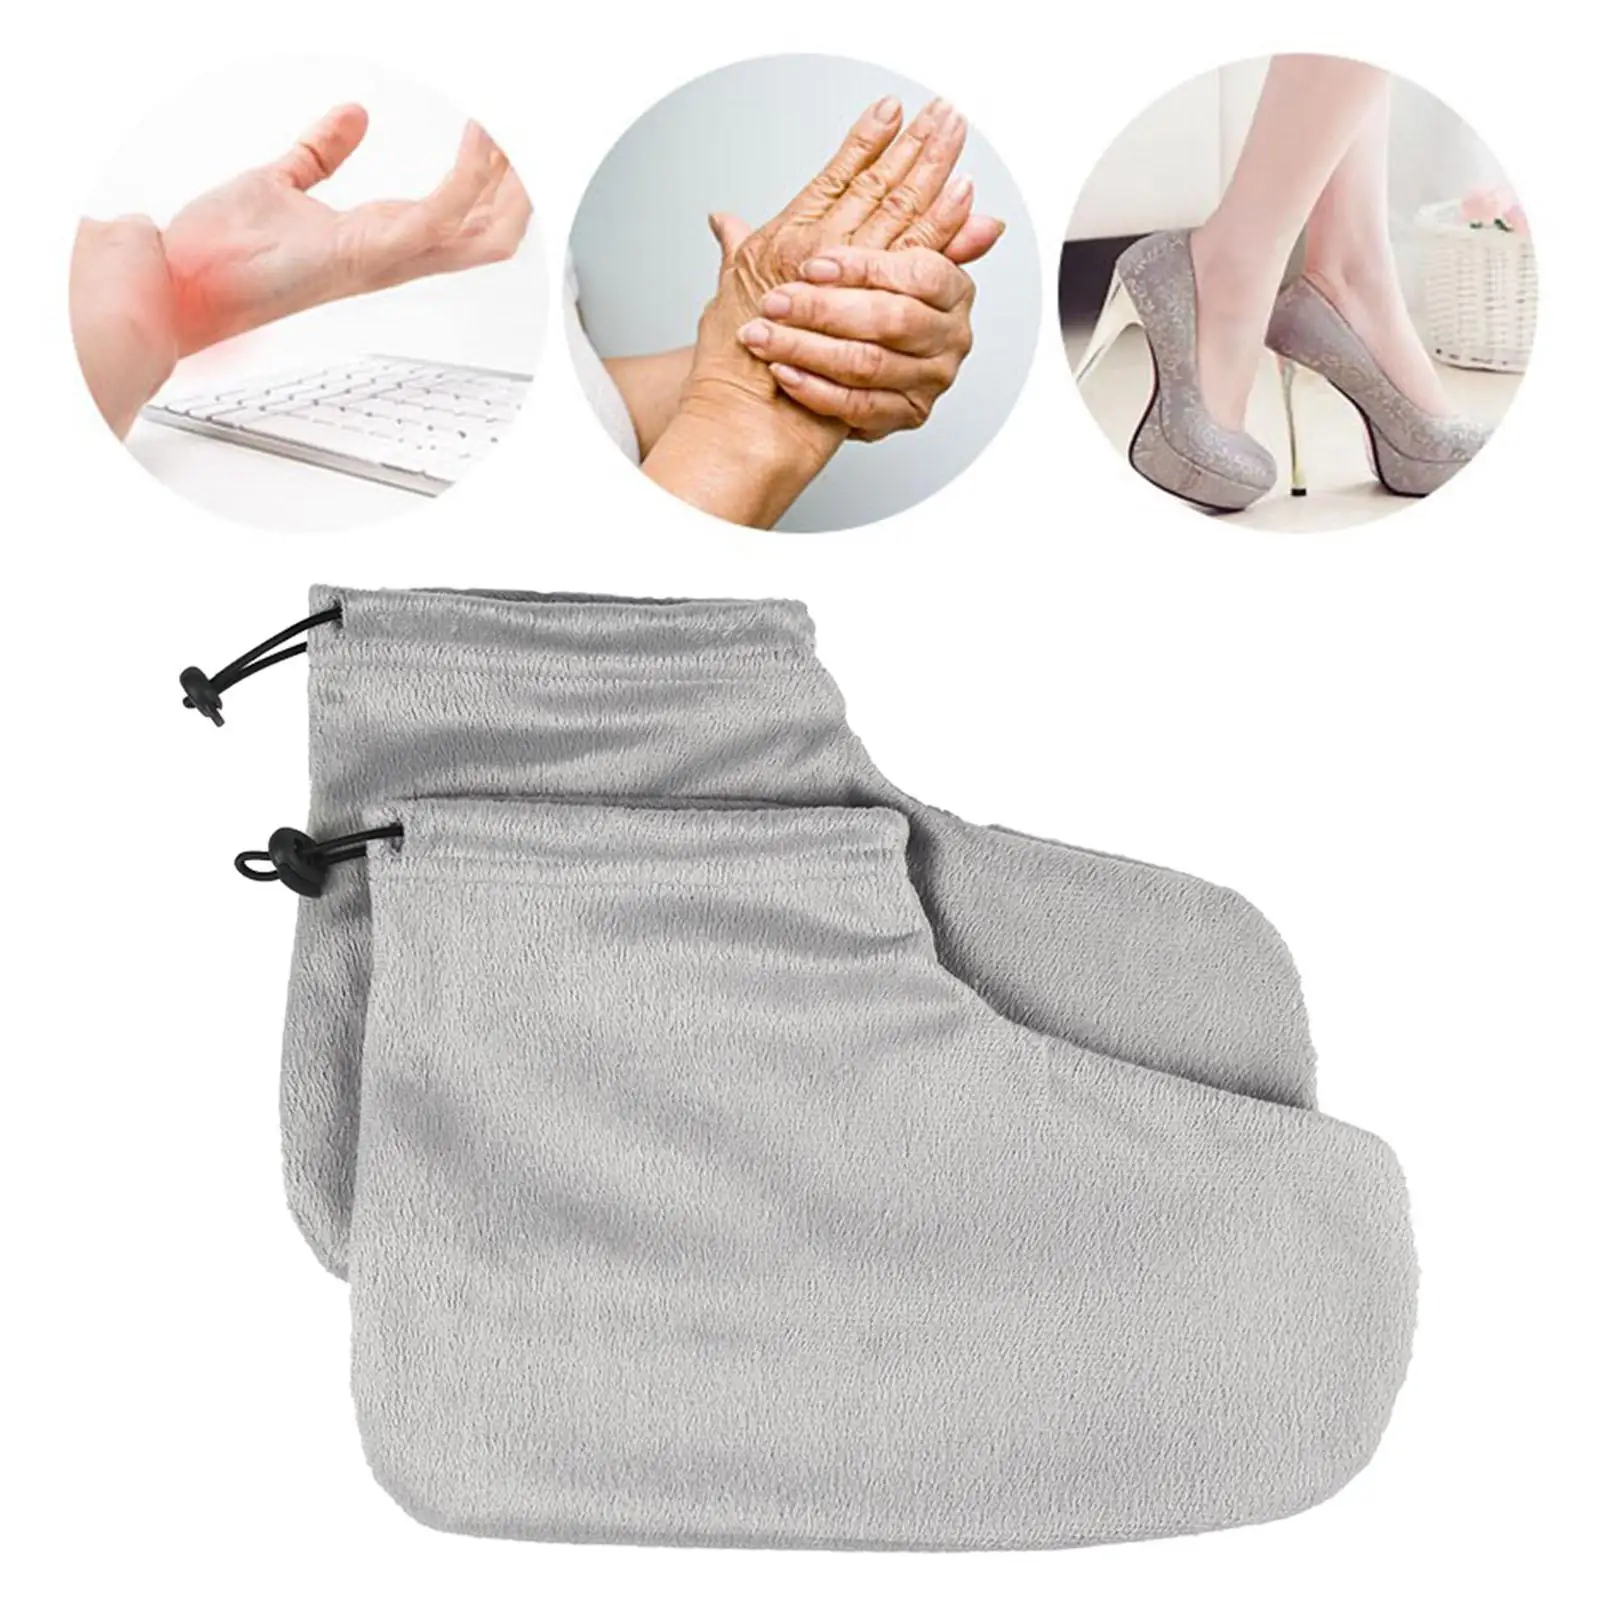 2 Pieces Paraffin Wax Mitts for Hand and Feet Skin Care Heat Wax Mitten Infrared Machine Keep Warm Wax Booties Nail Art Tools